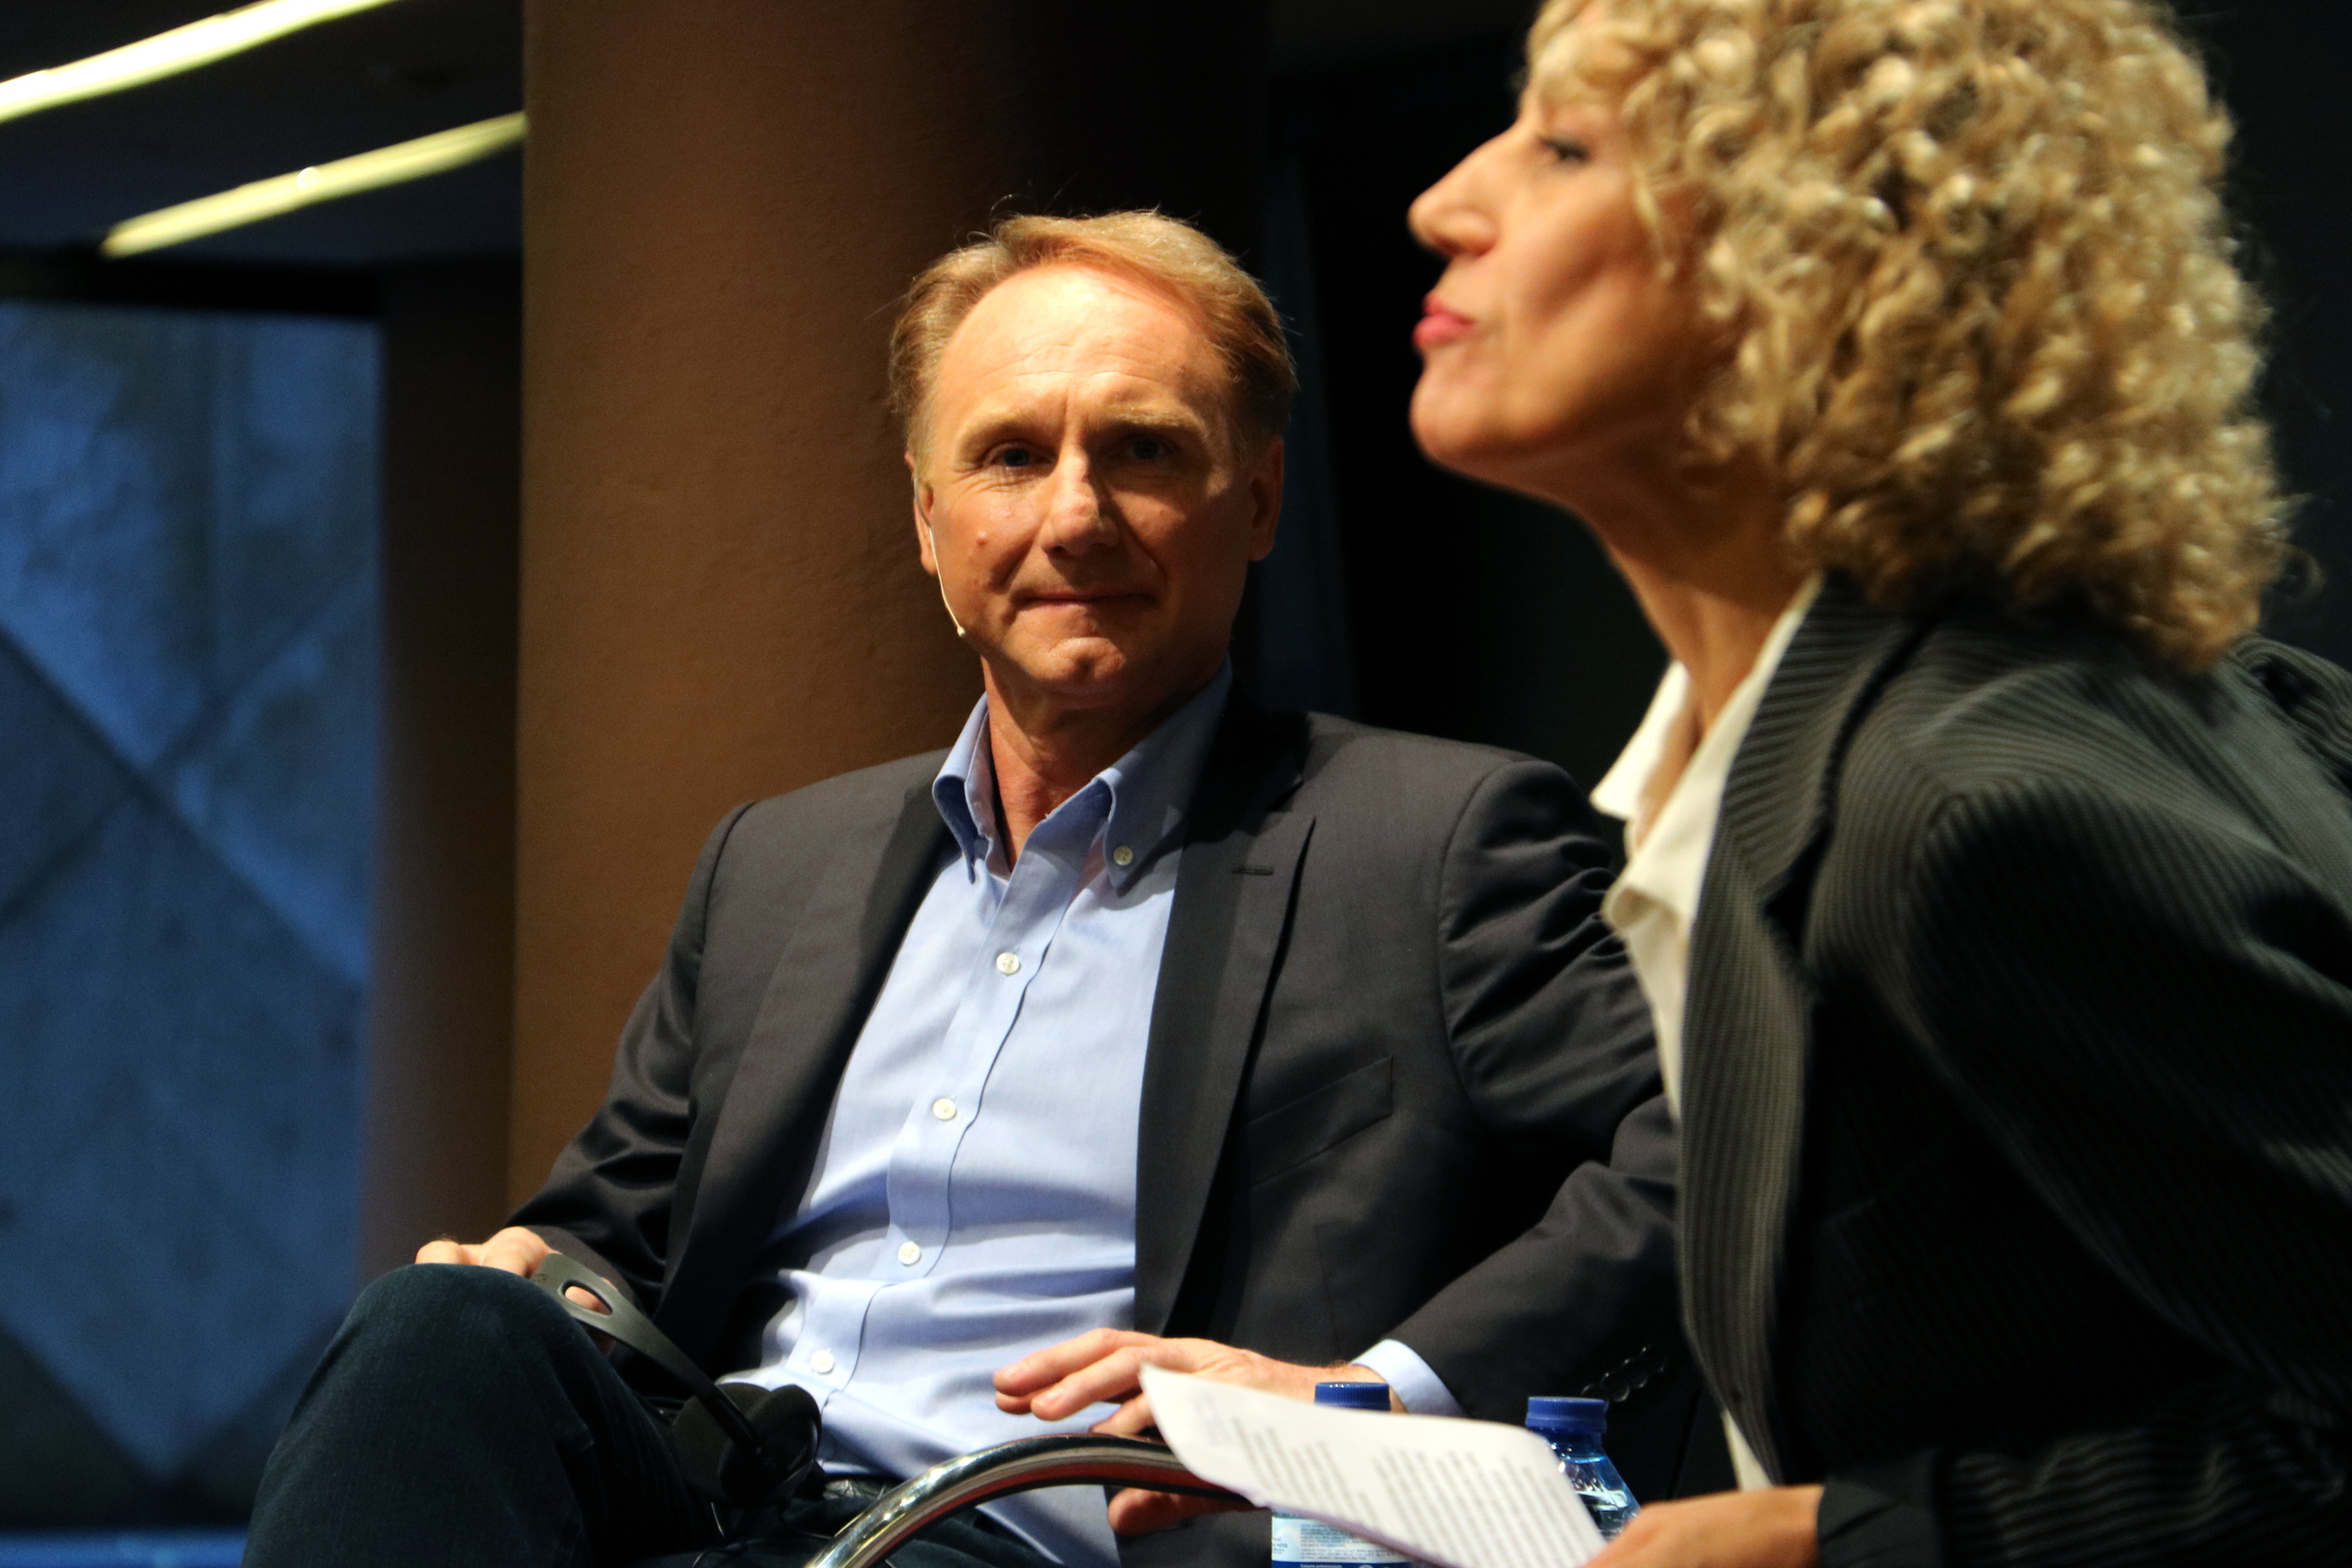 Novelist Dan Brown at a press conference in Barcelona on 17 October (by ACN)